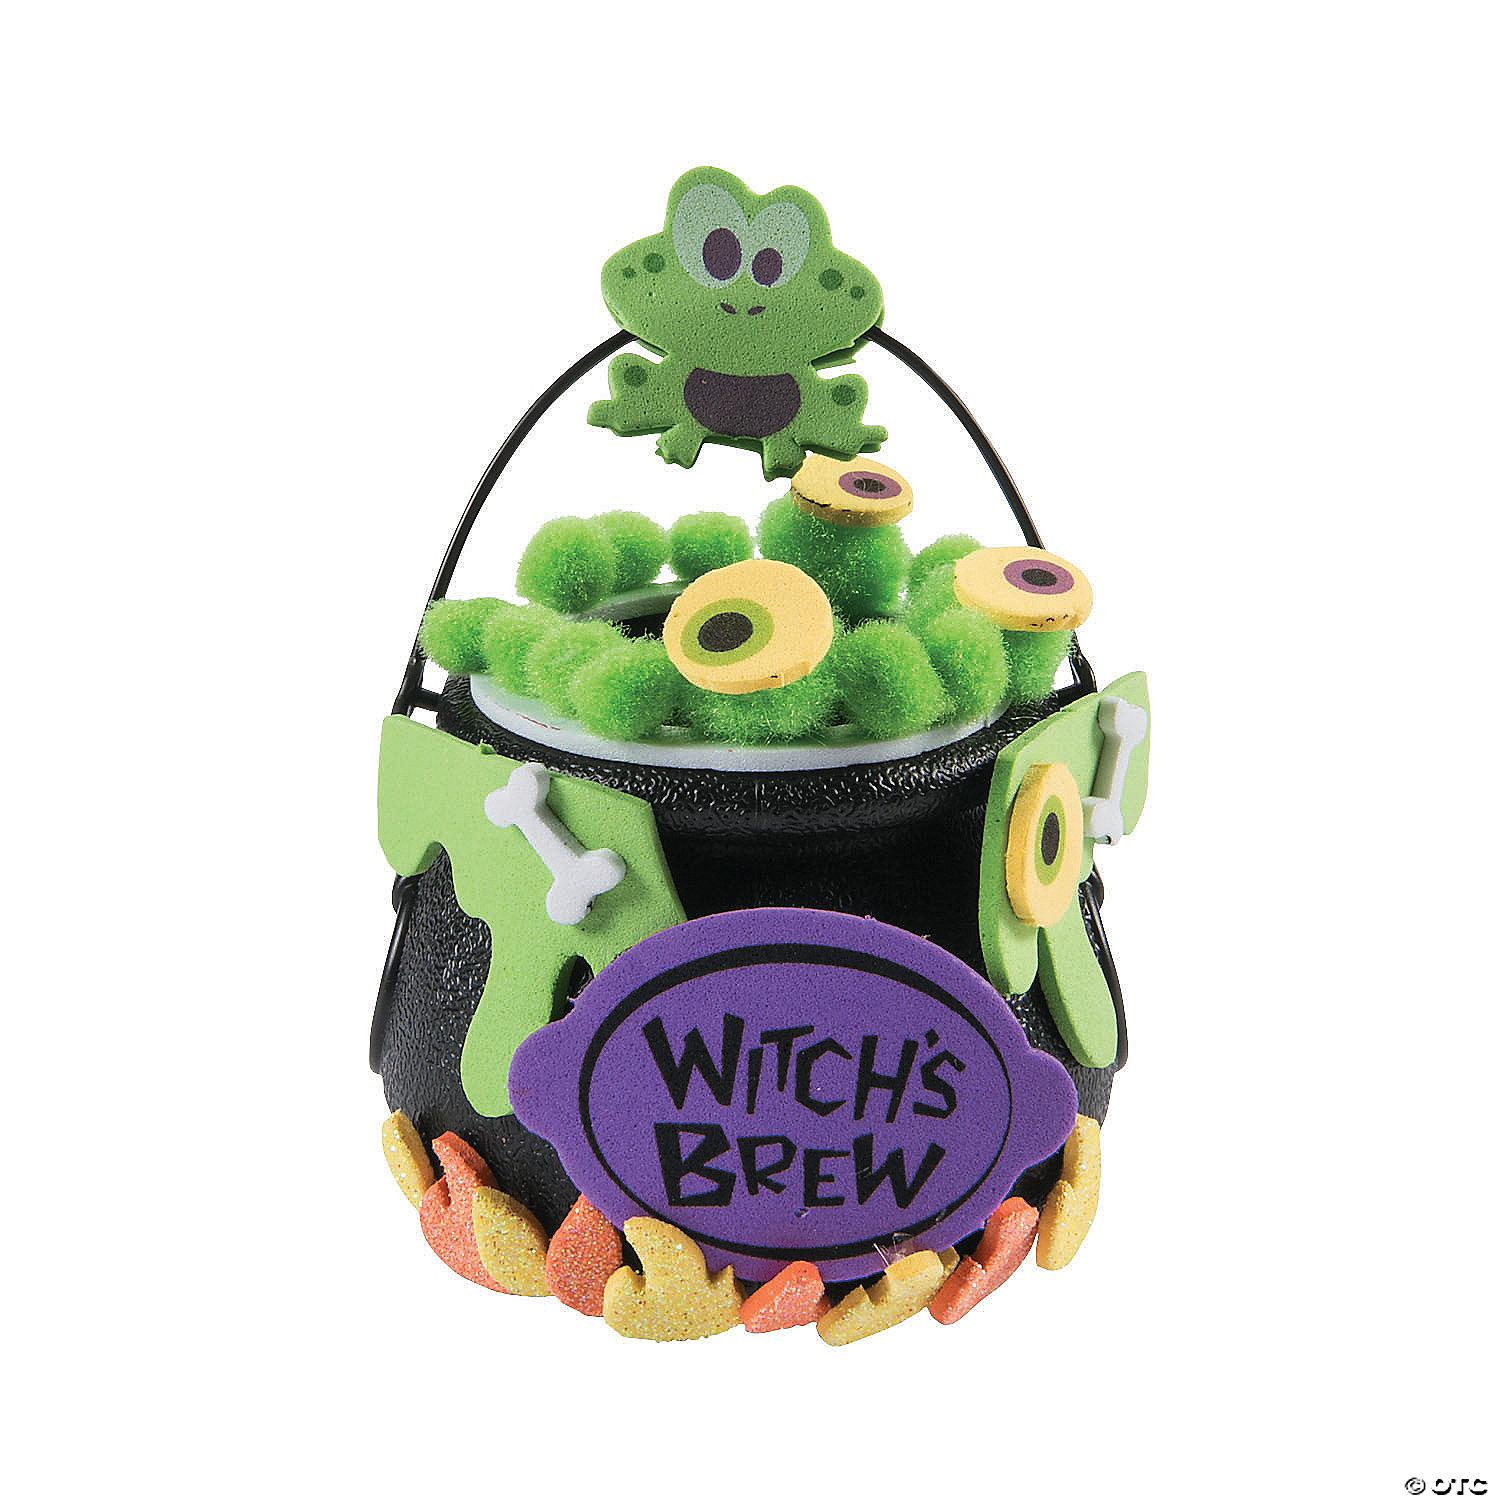 https://www.orientaltrading.com/witch-cauldron-craft-kit-makes-12-a2-13811512.fltr?categoryId=550055+1237&rd=halloween%20craft